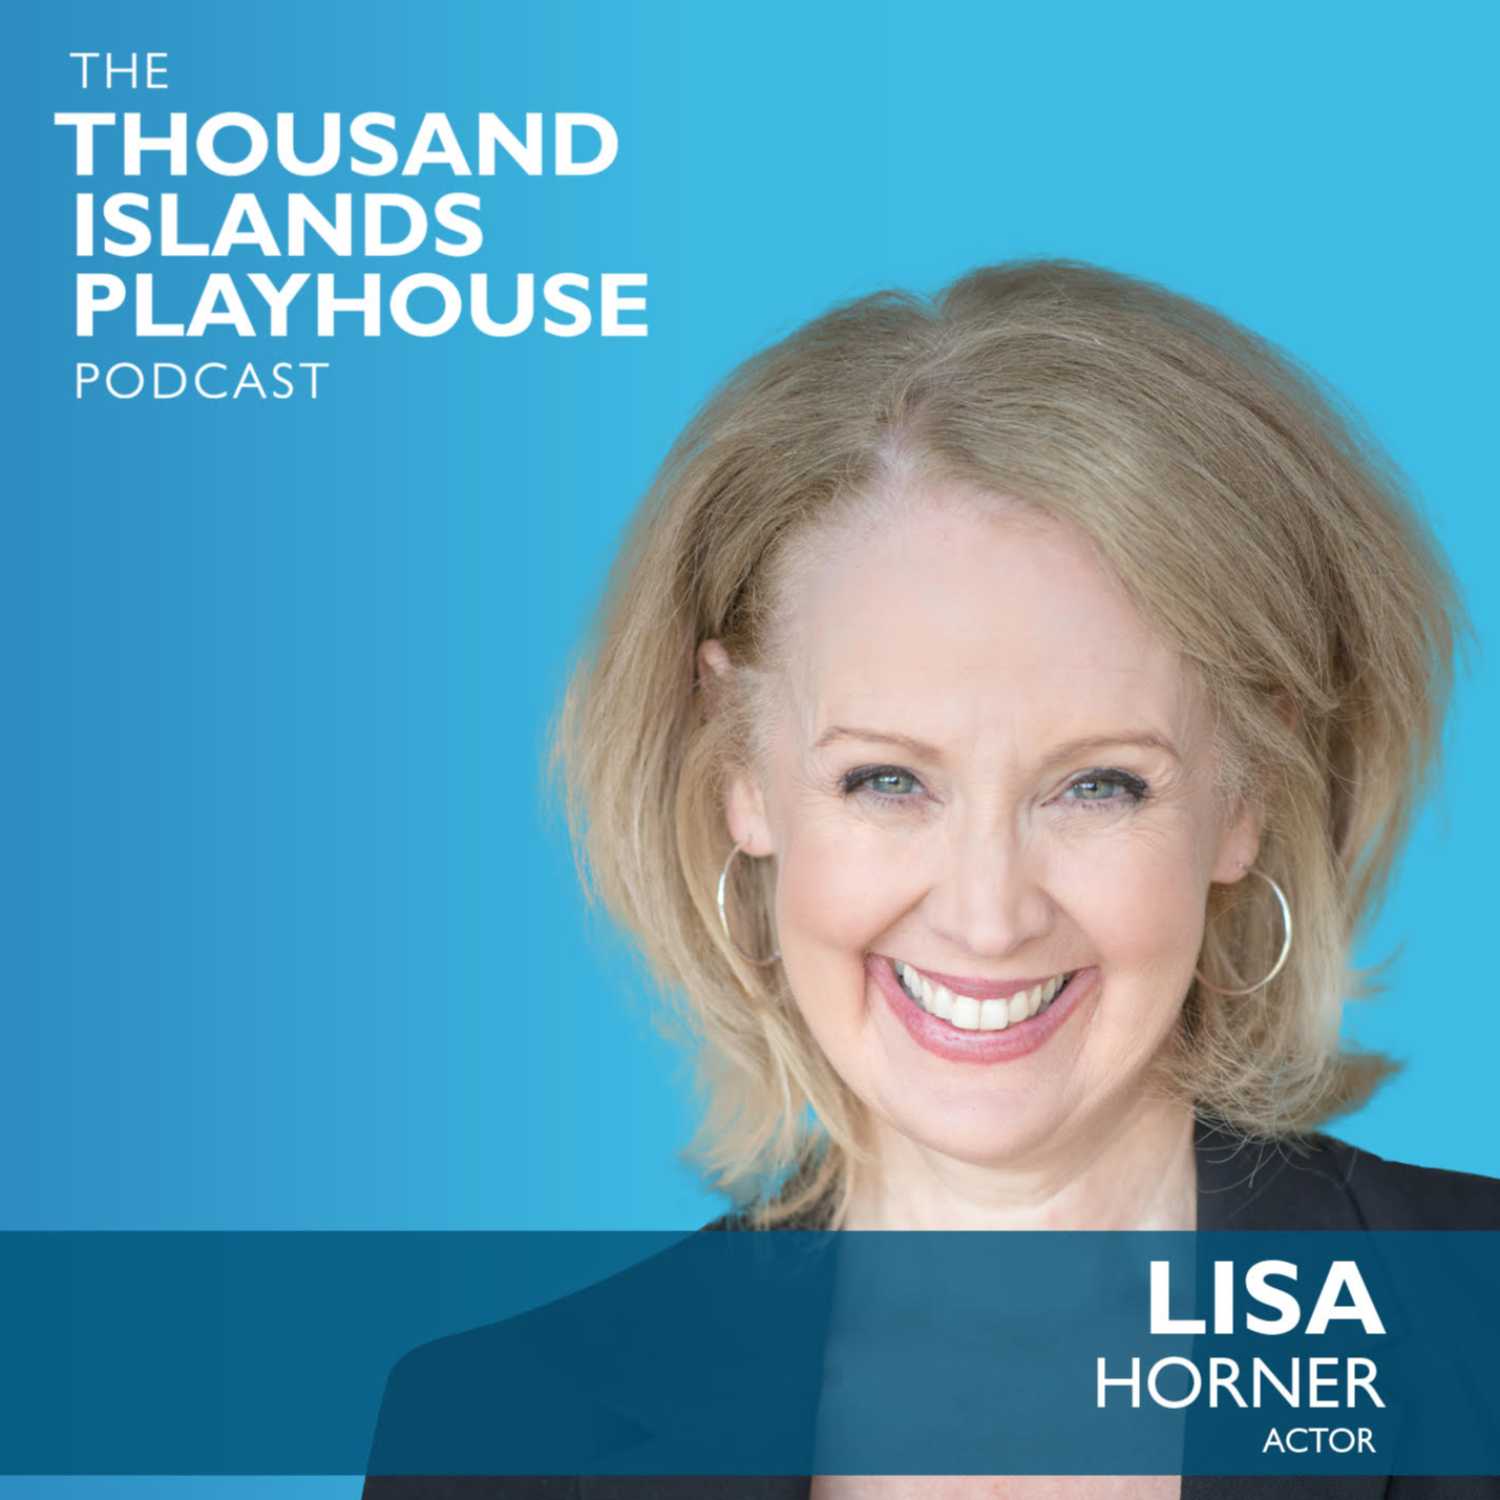 Every Brilliant Thing: Lisa Horner